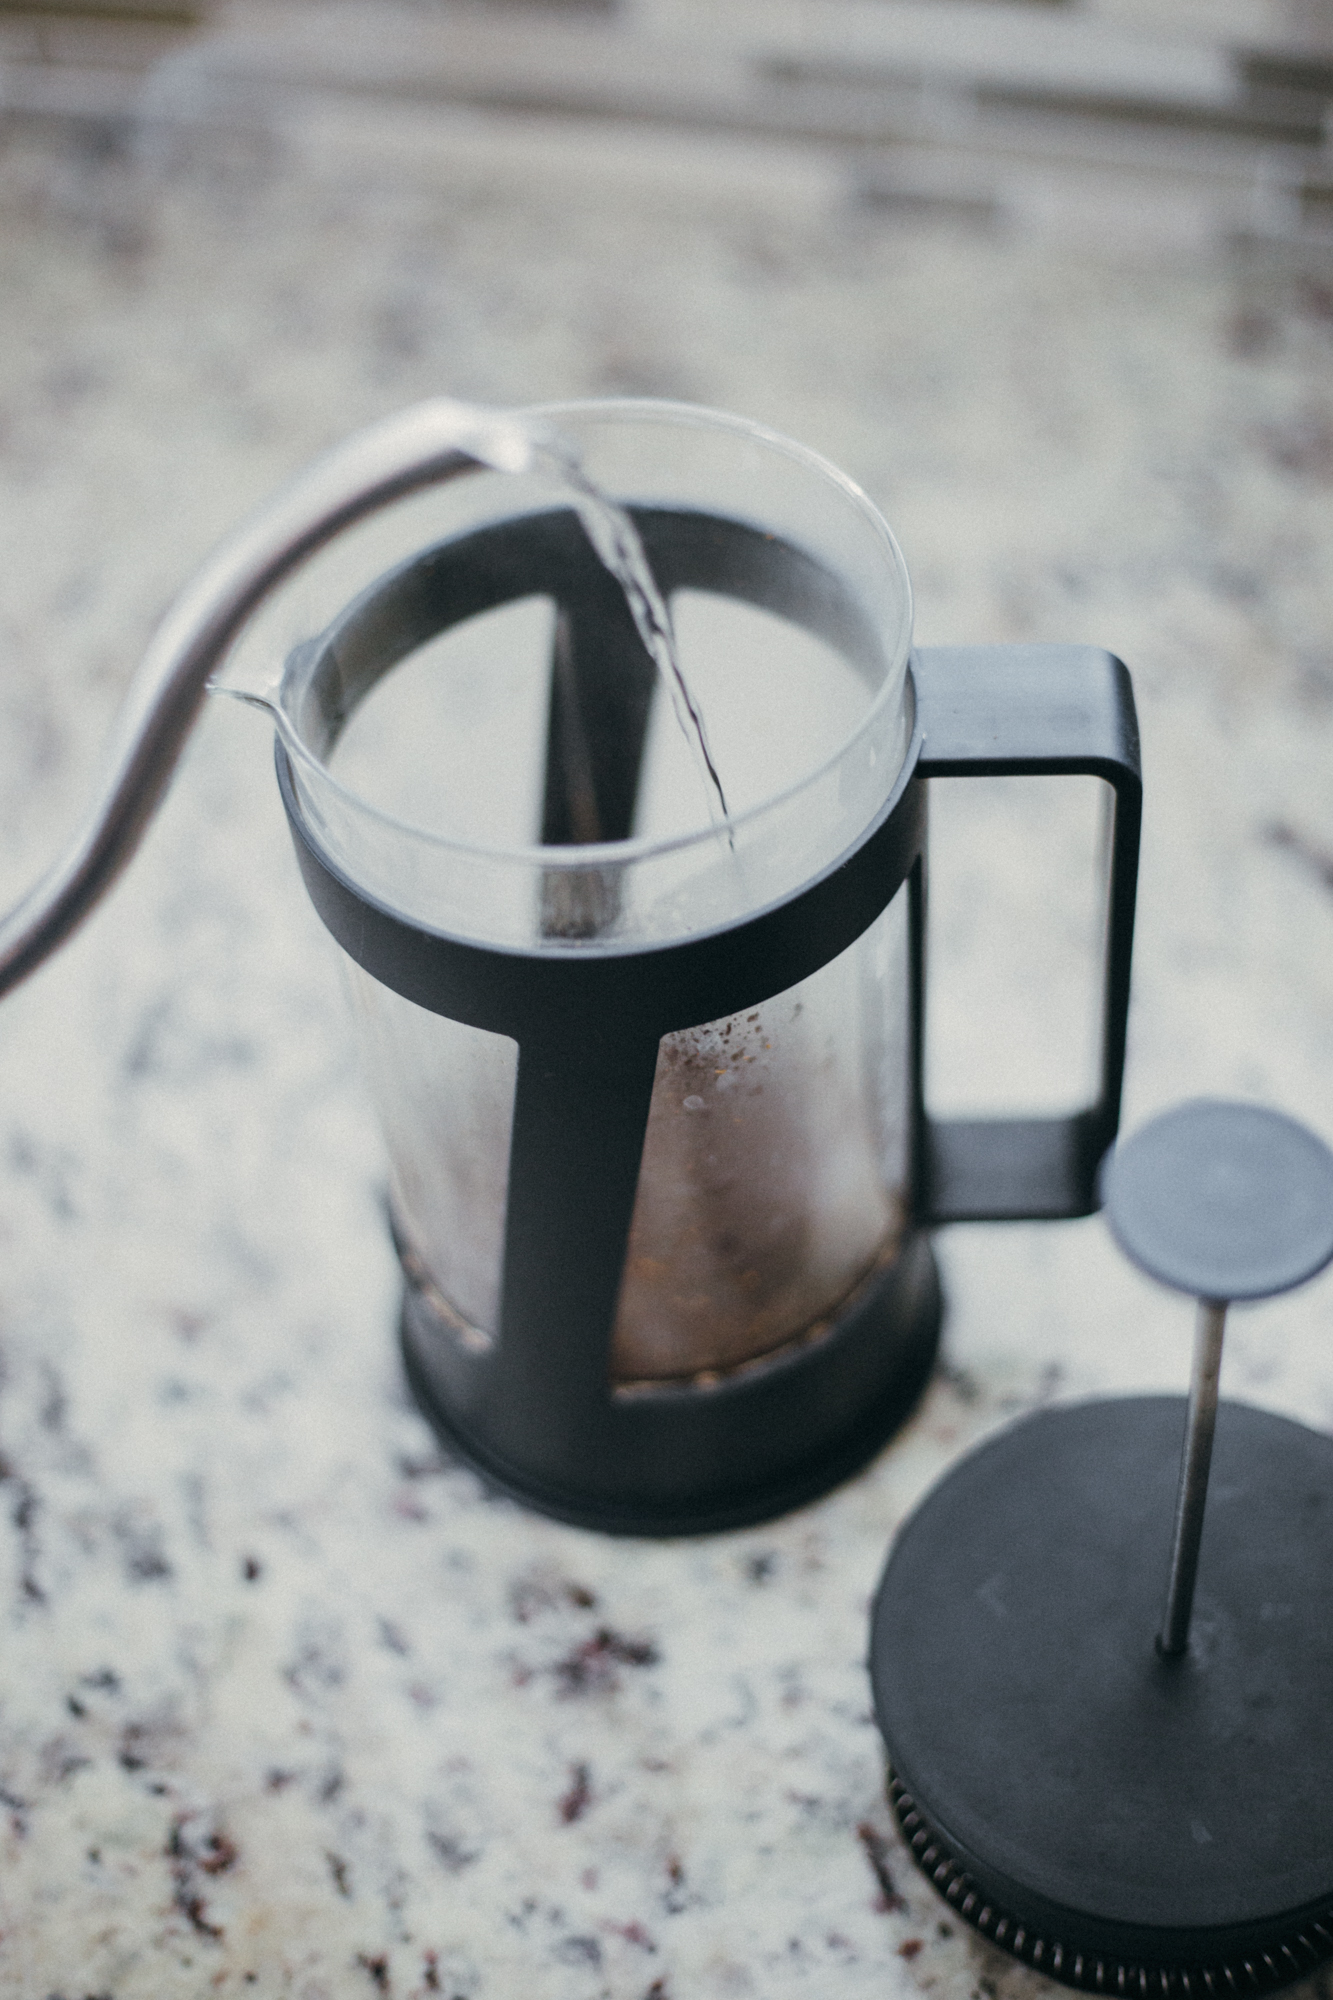  Pour boiling water in french press. Make sure to use coarse coffee grounds. 